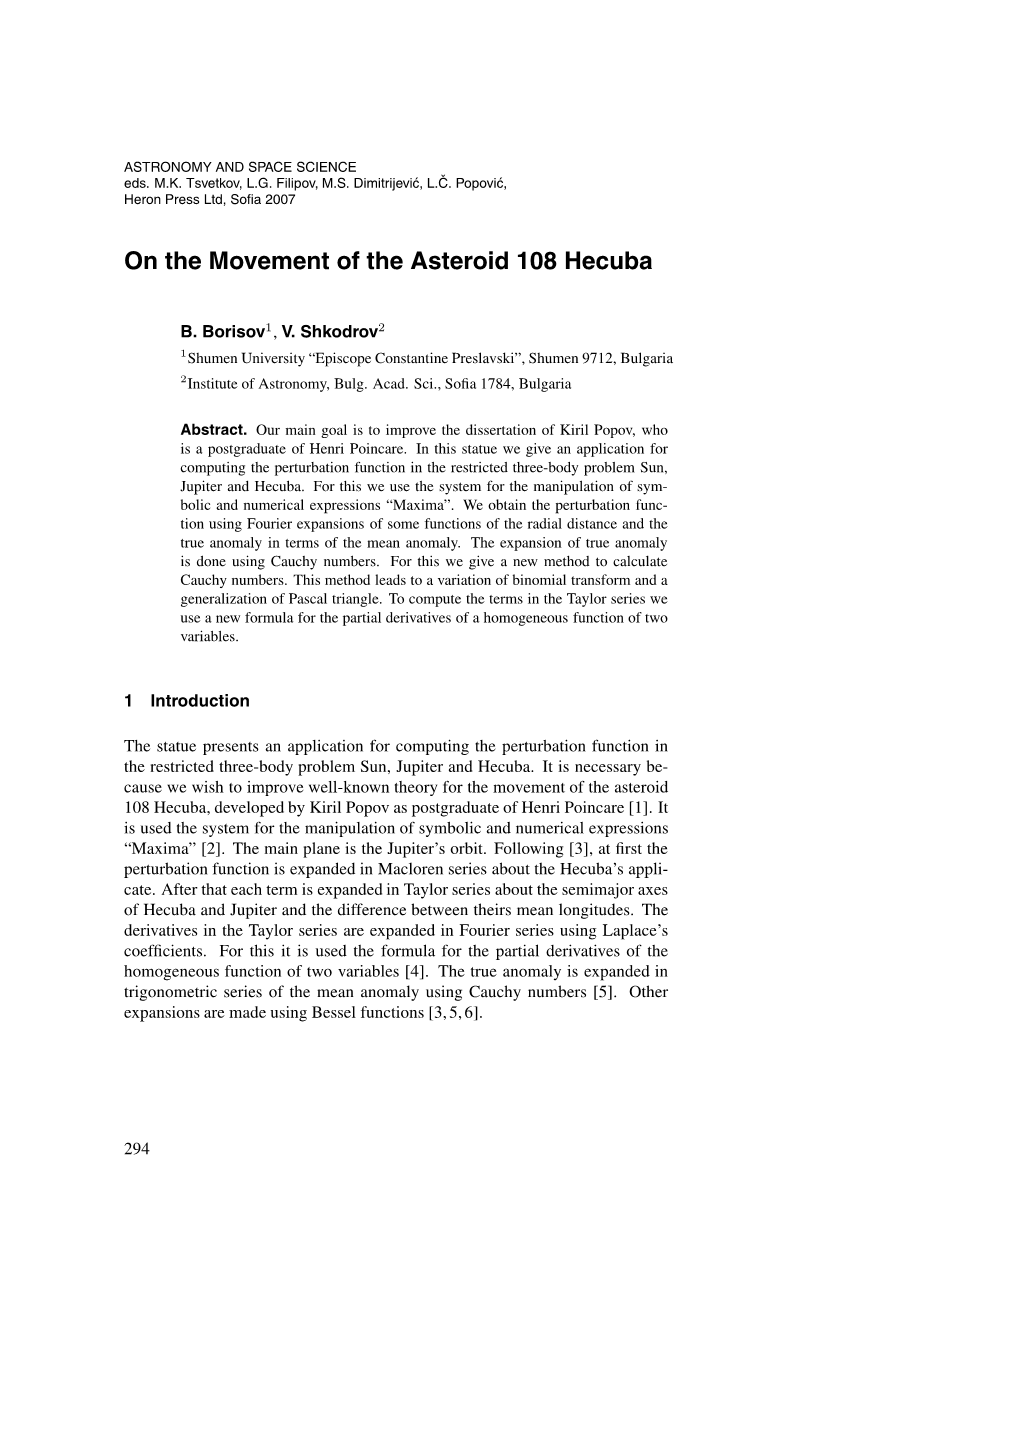 On the Movement of the Asteroid 108 Hecuba